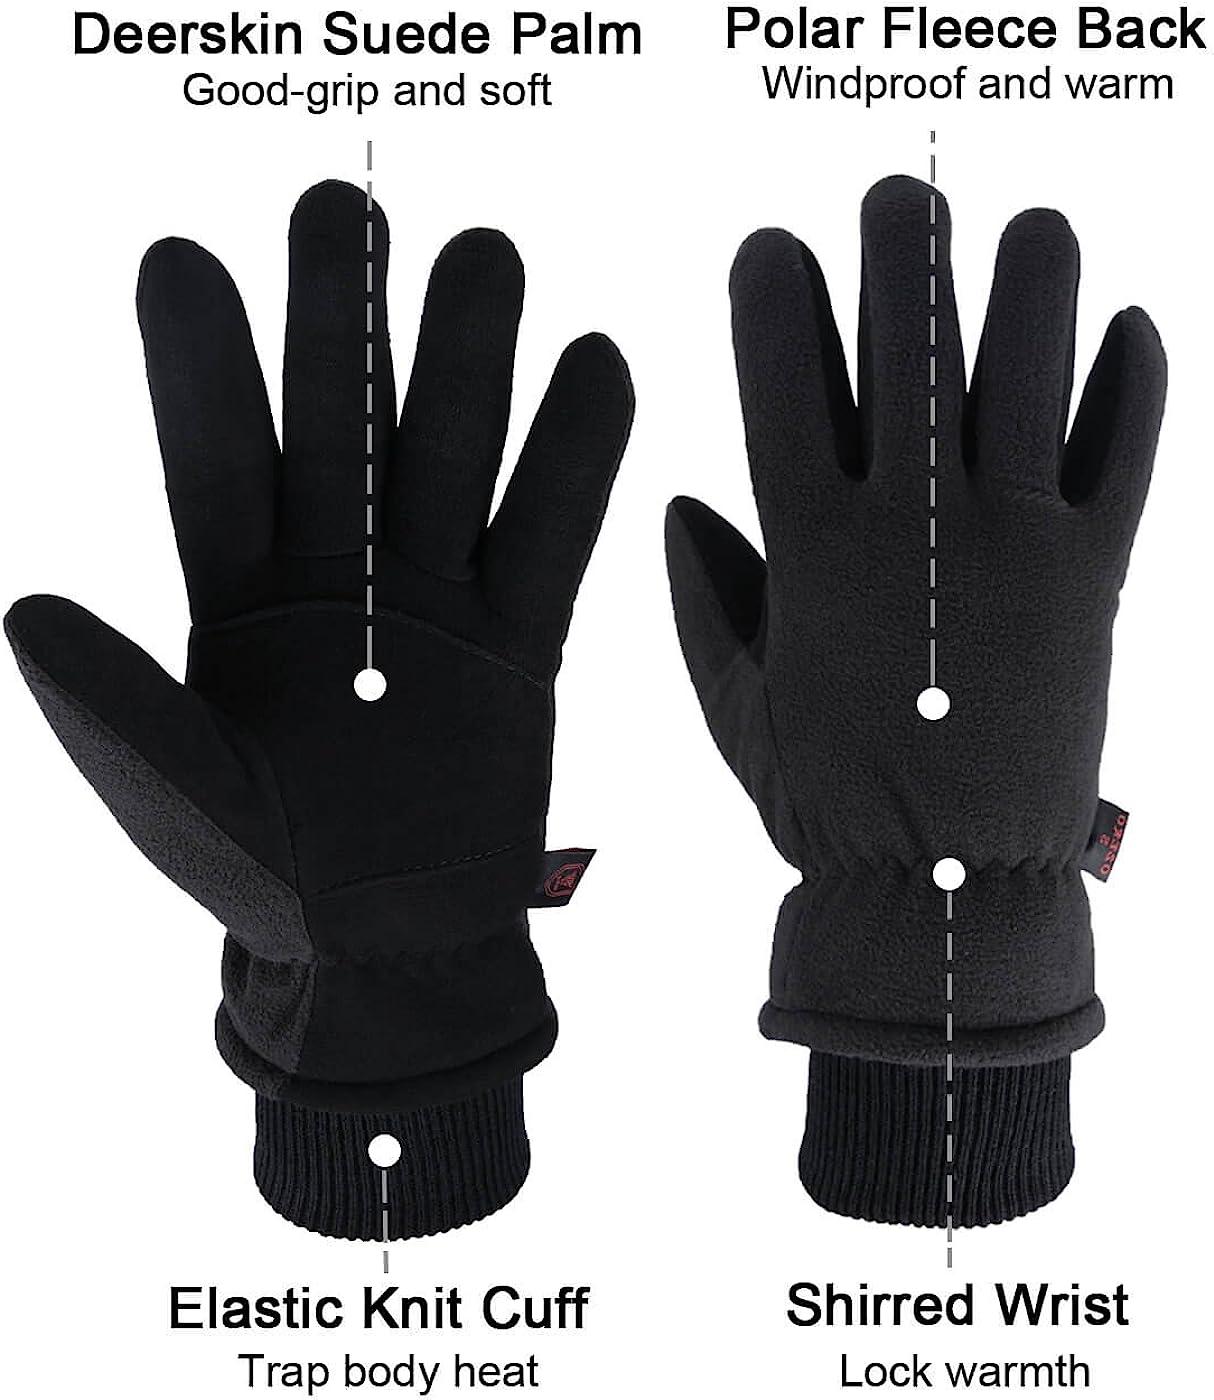 FIRM GRIP X-Large Winter Suede Leather Gloves with Insulated